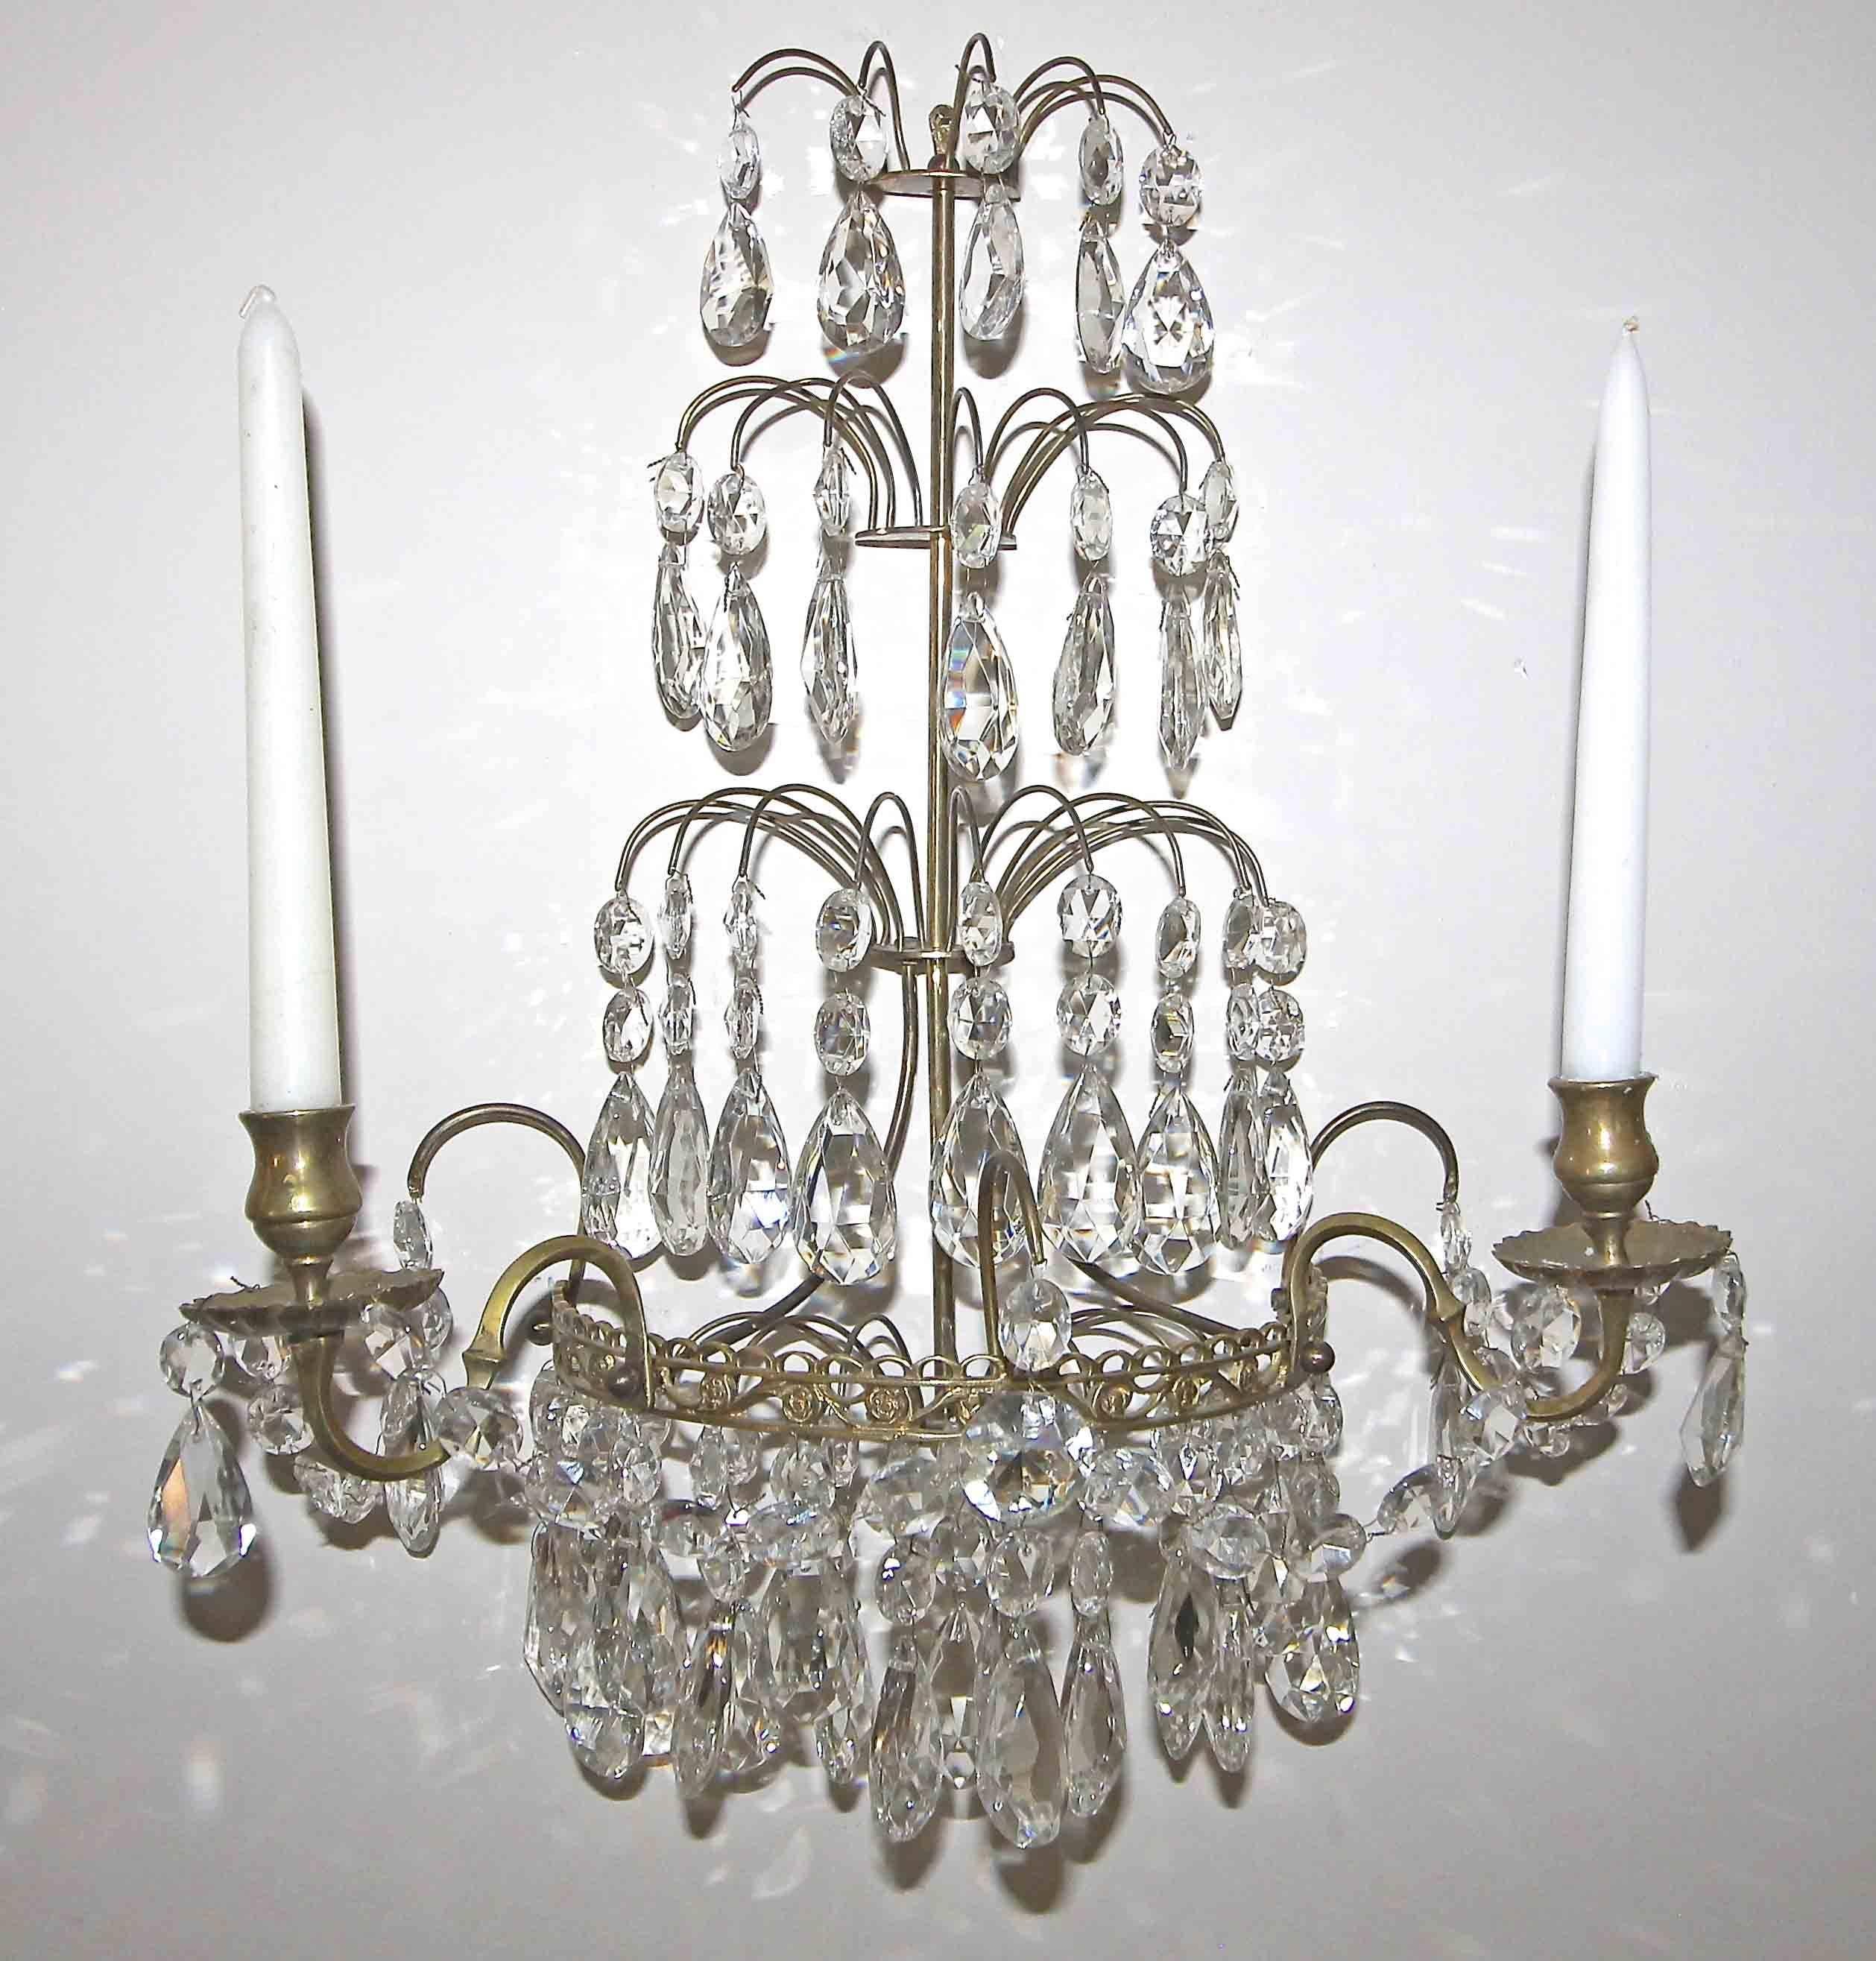 Pair of Swedish Gustavian Style Crystal and Brass Candle Wall Sconces In Good Condition For Sale In Dallas, TX